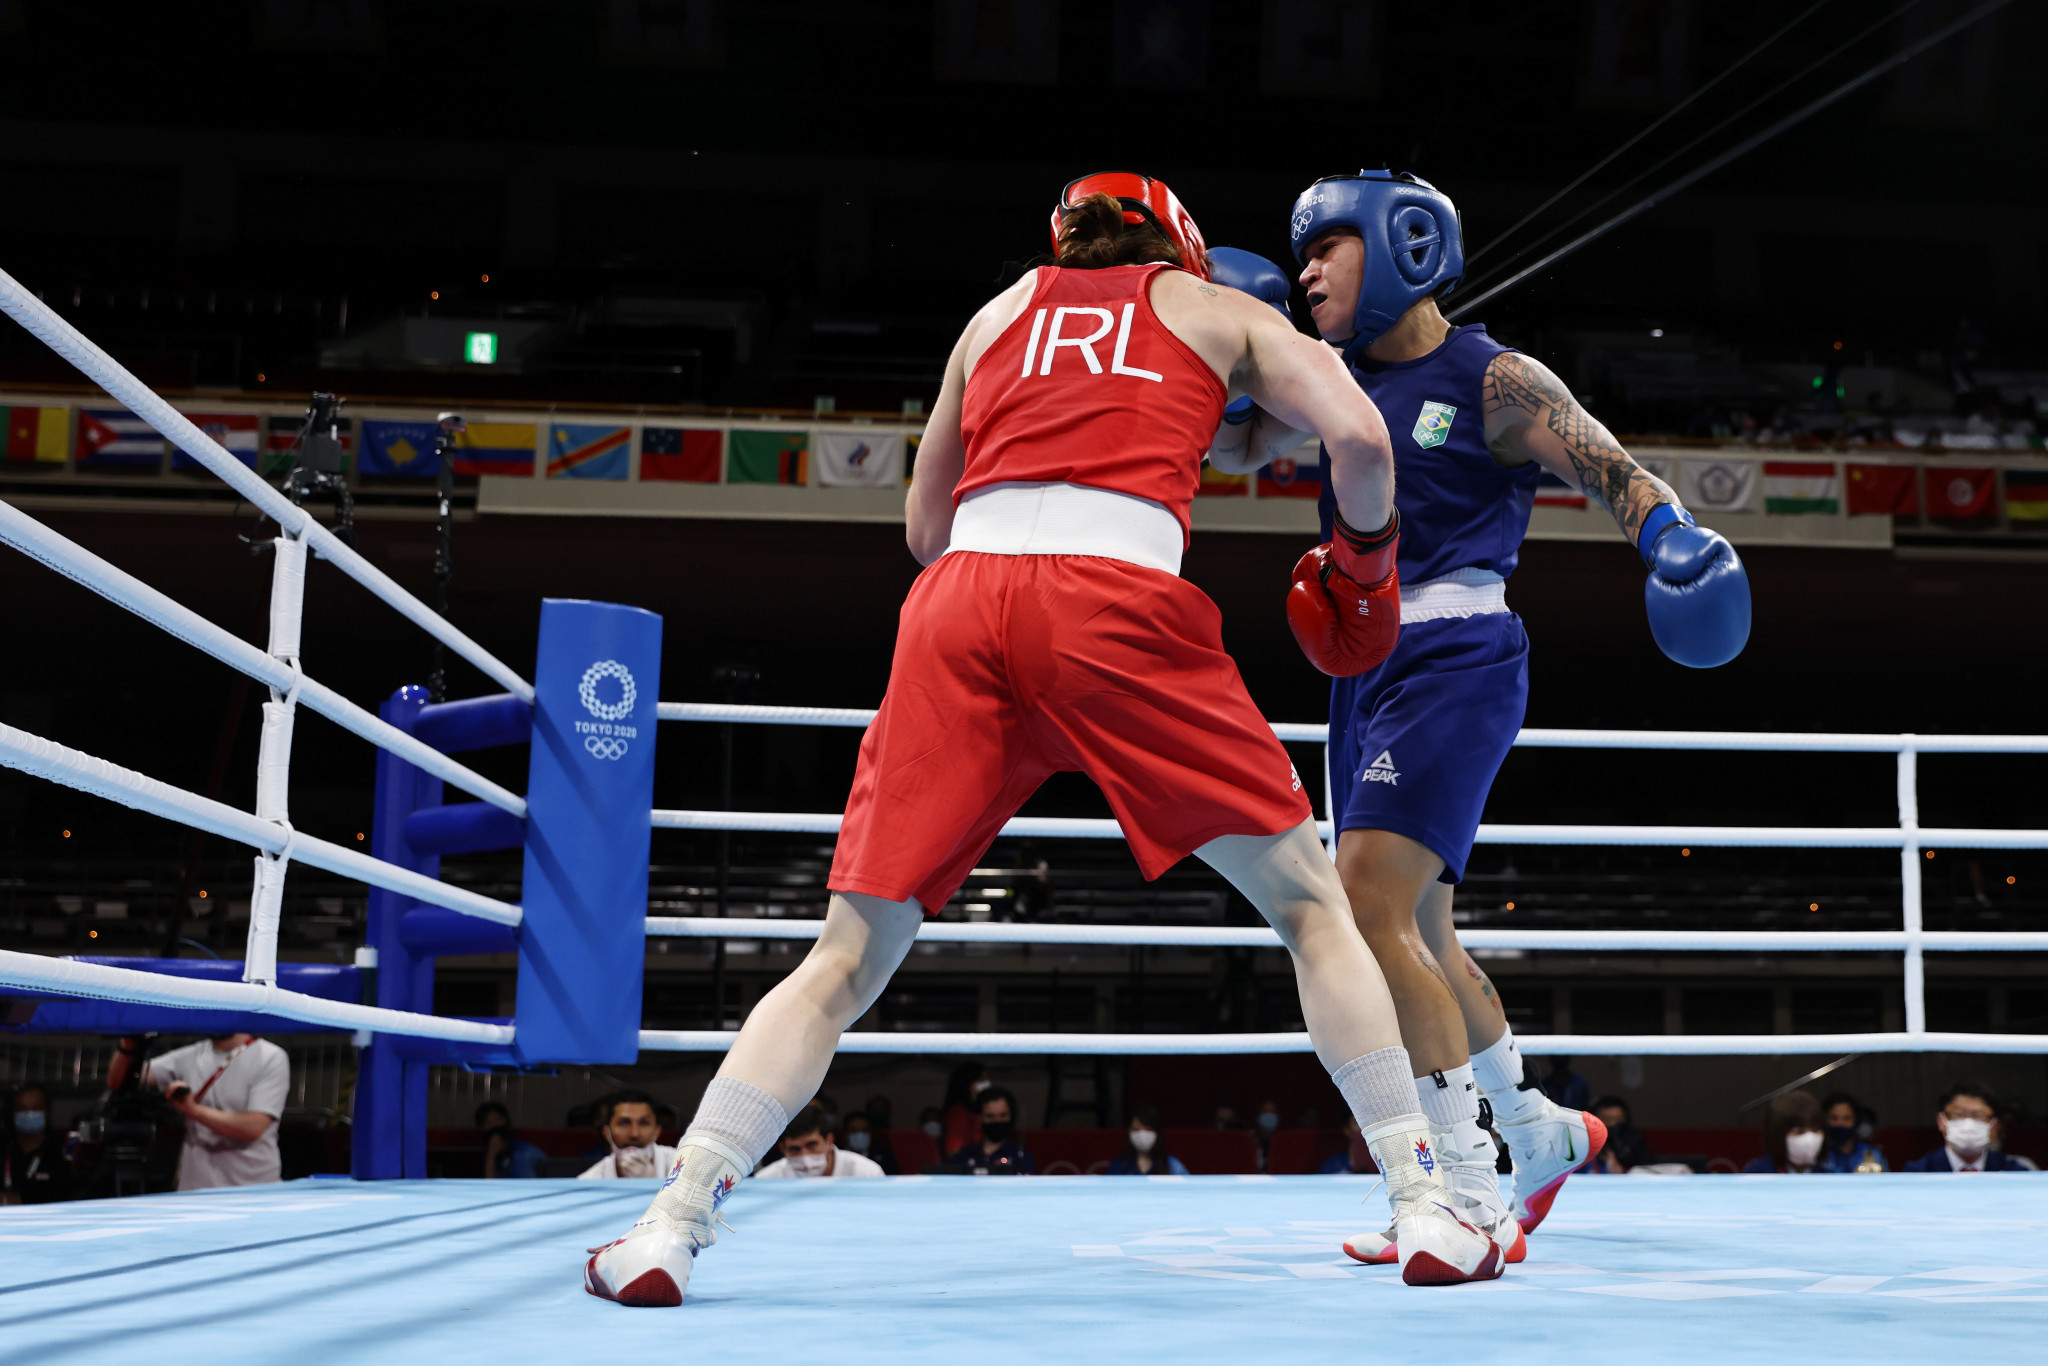 Ireland expresses support for World Boxing after being absent from launch